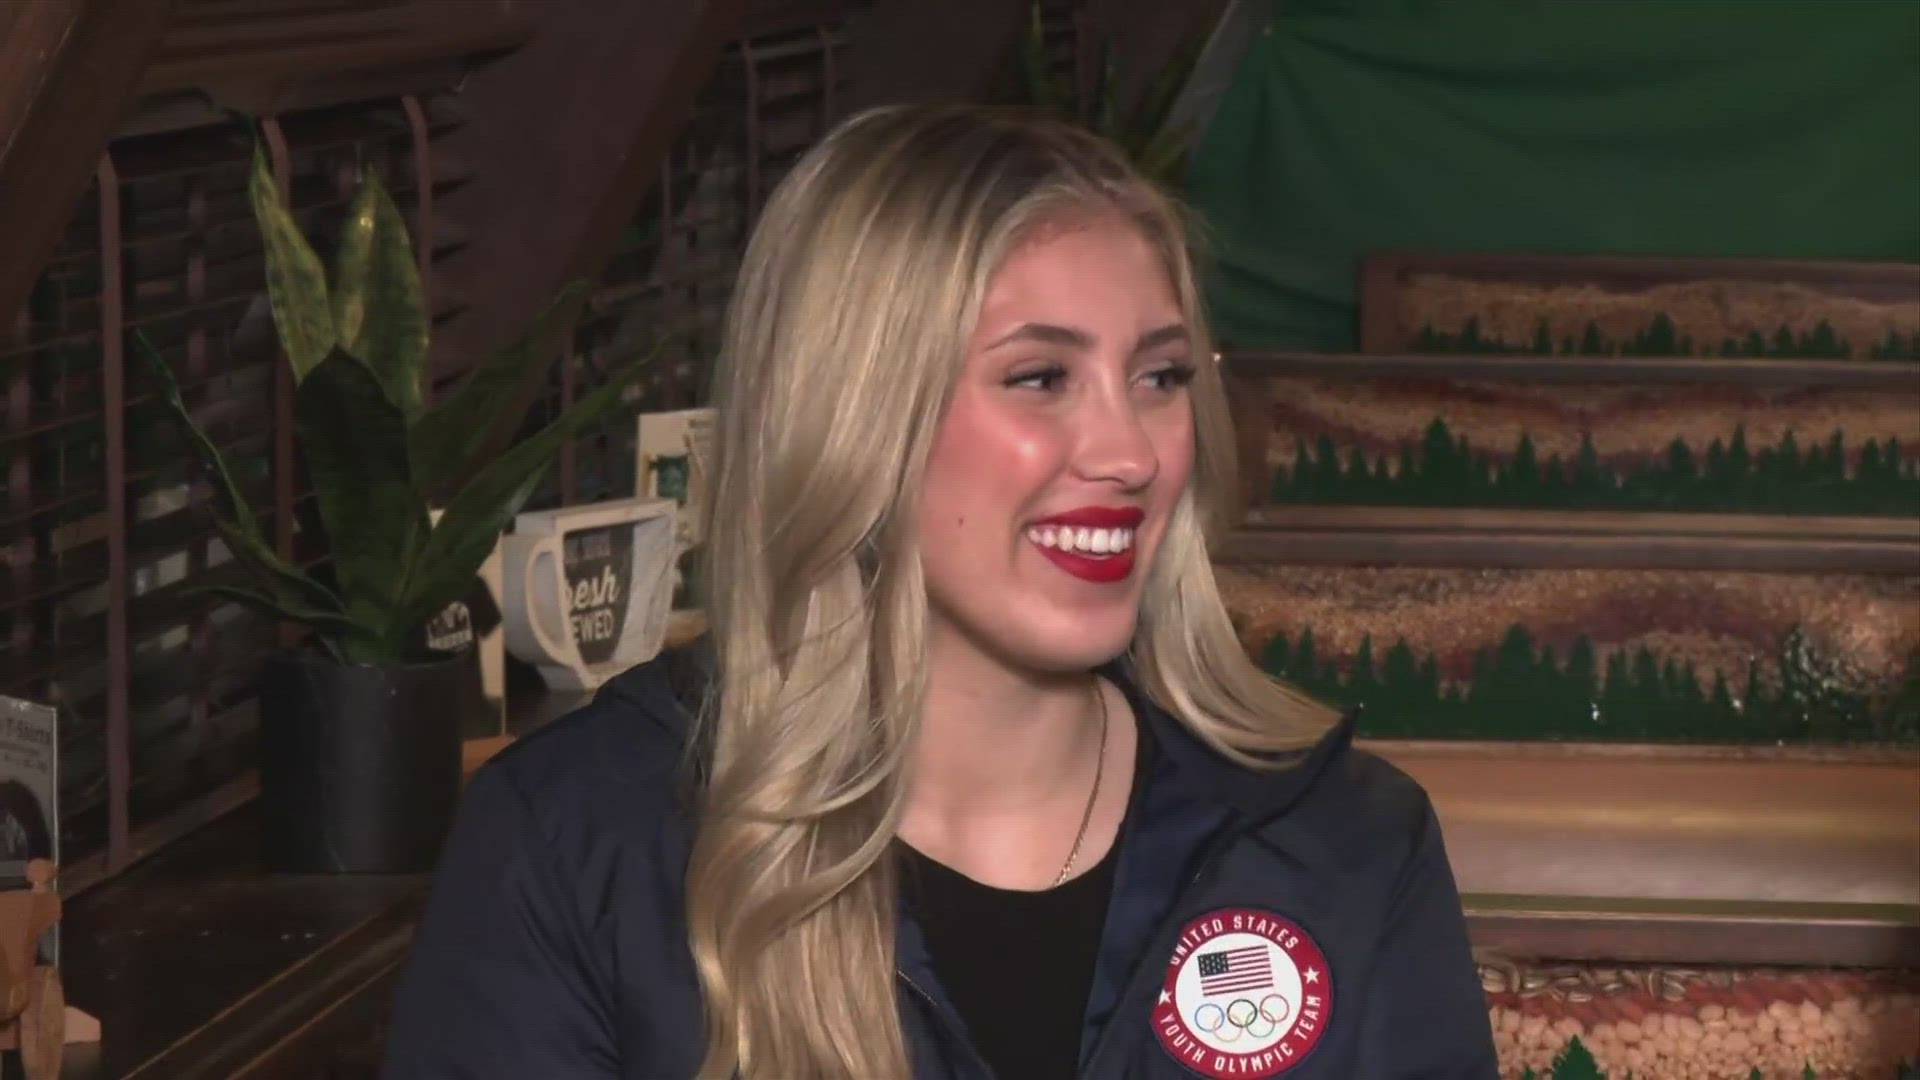 Emily Bradley, a Sacramento teenager, is set to compete in bobsled for the Youth Olympics in South Korea.